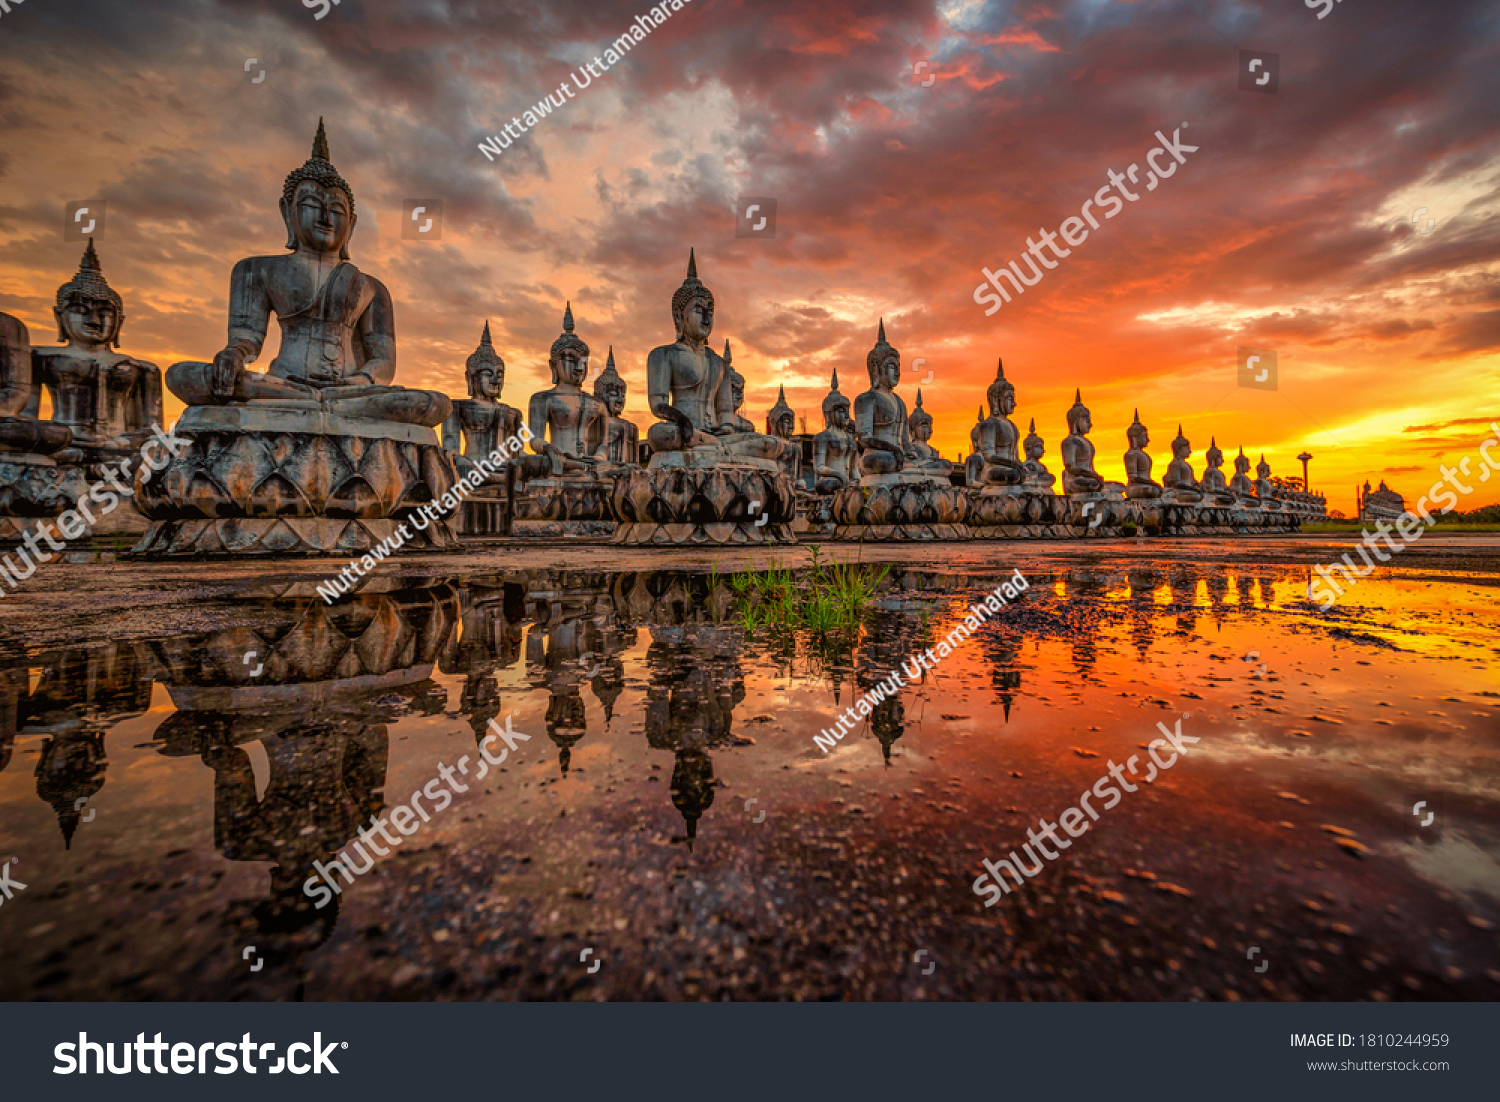 Many Statue buddha image at sunset in southen of Thailand #1810244959